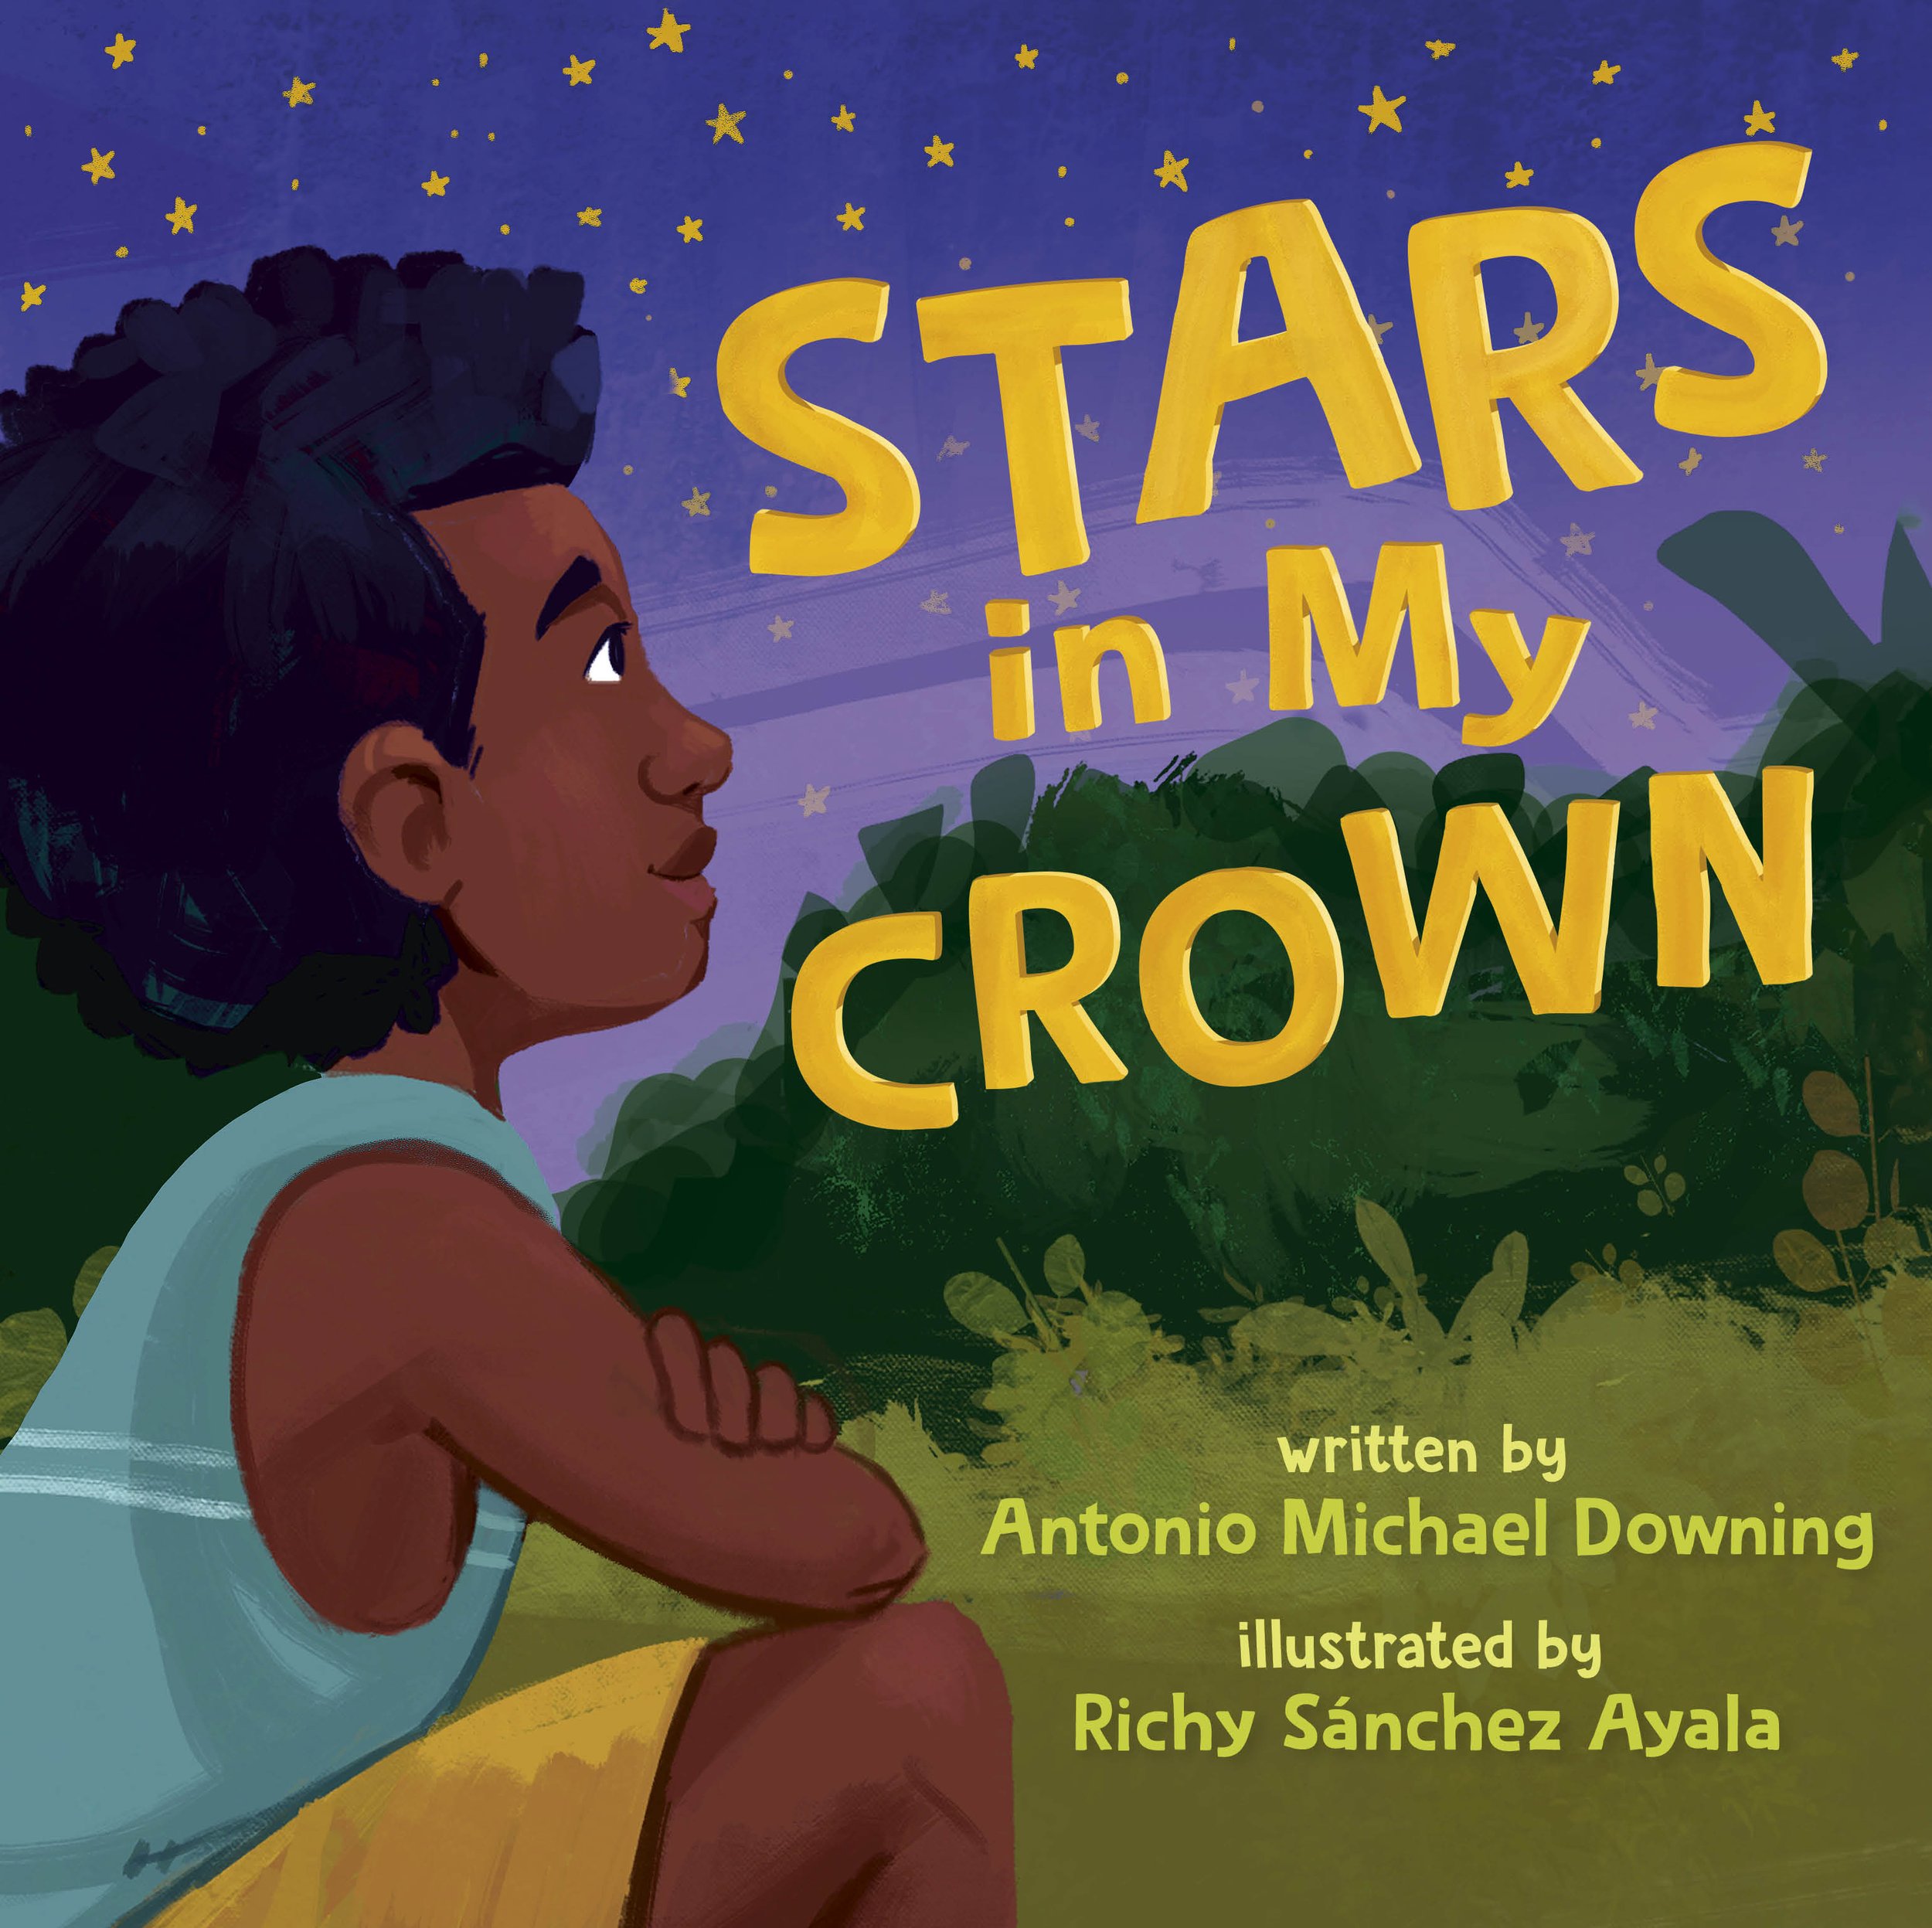 Stars in My Crown by Antonio Michael Downing